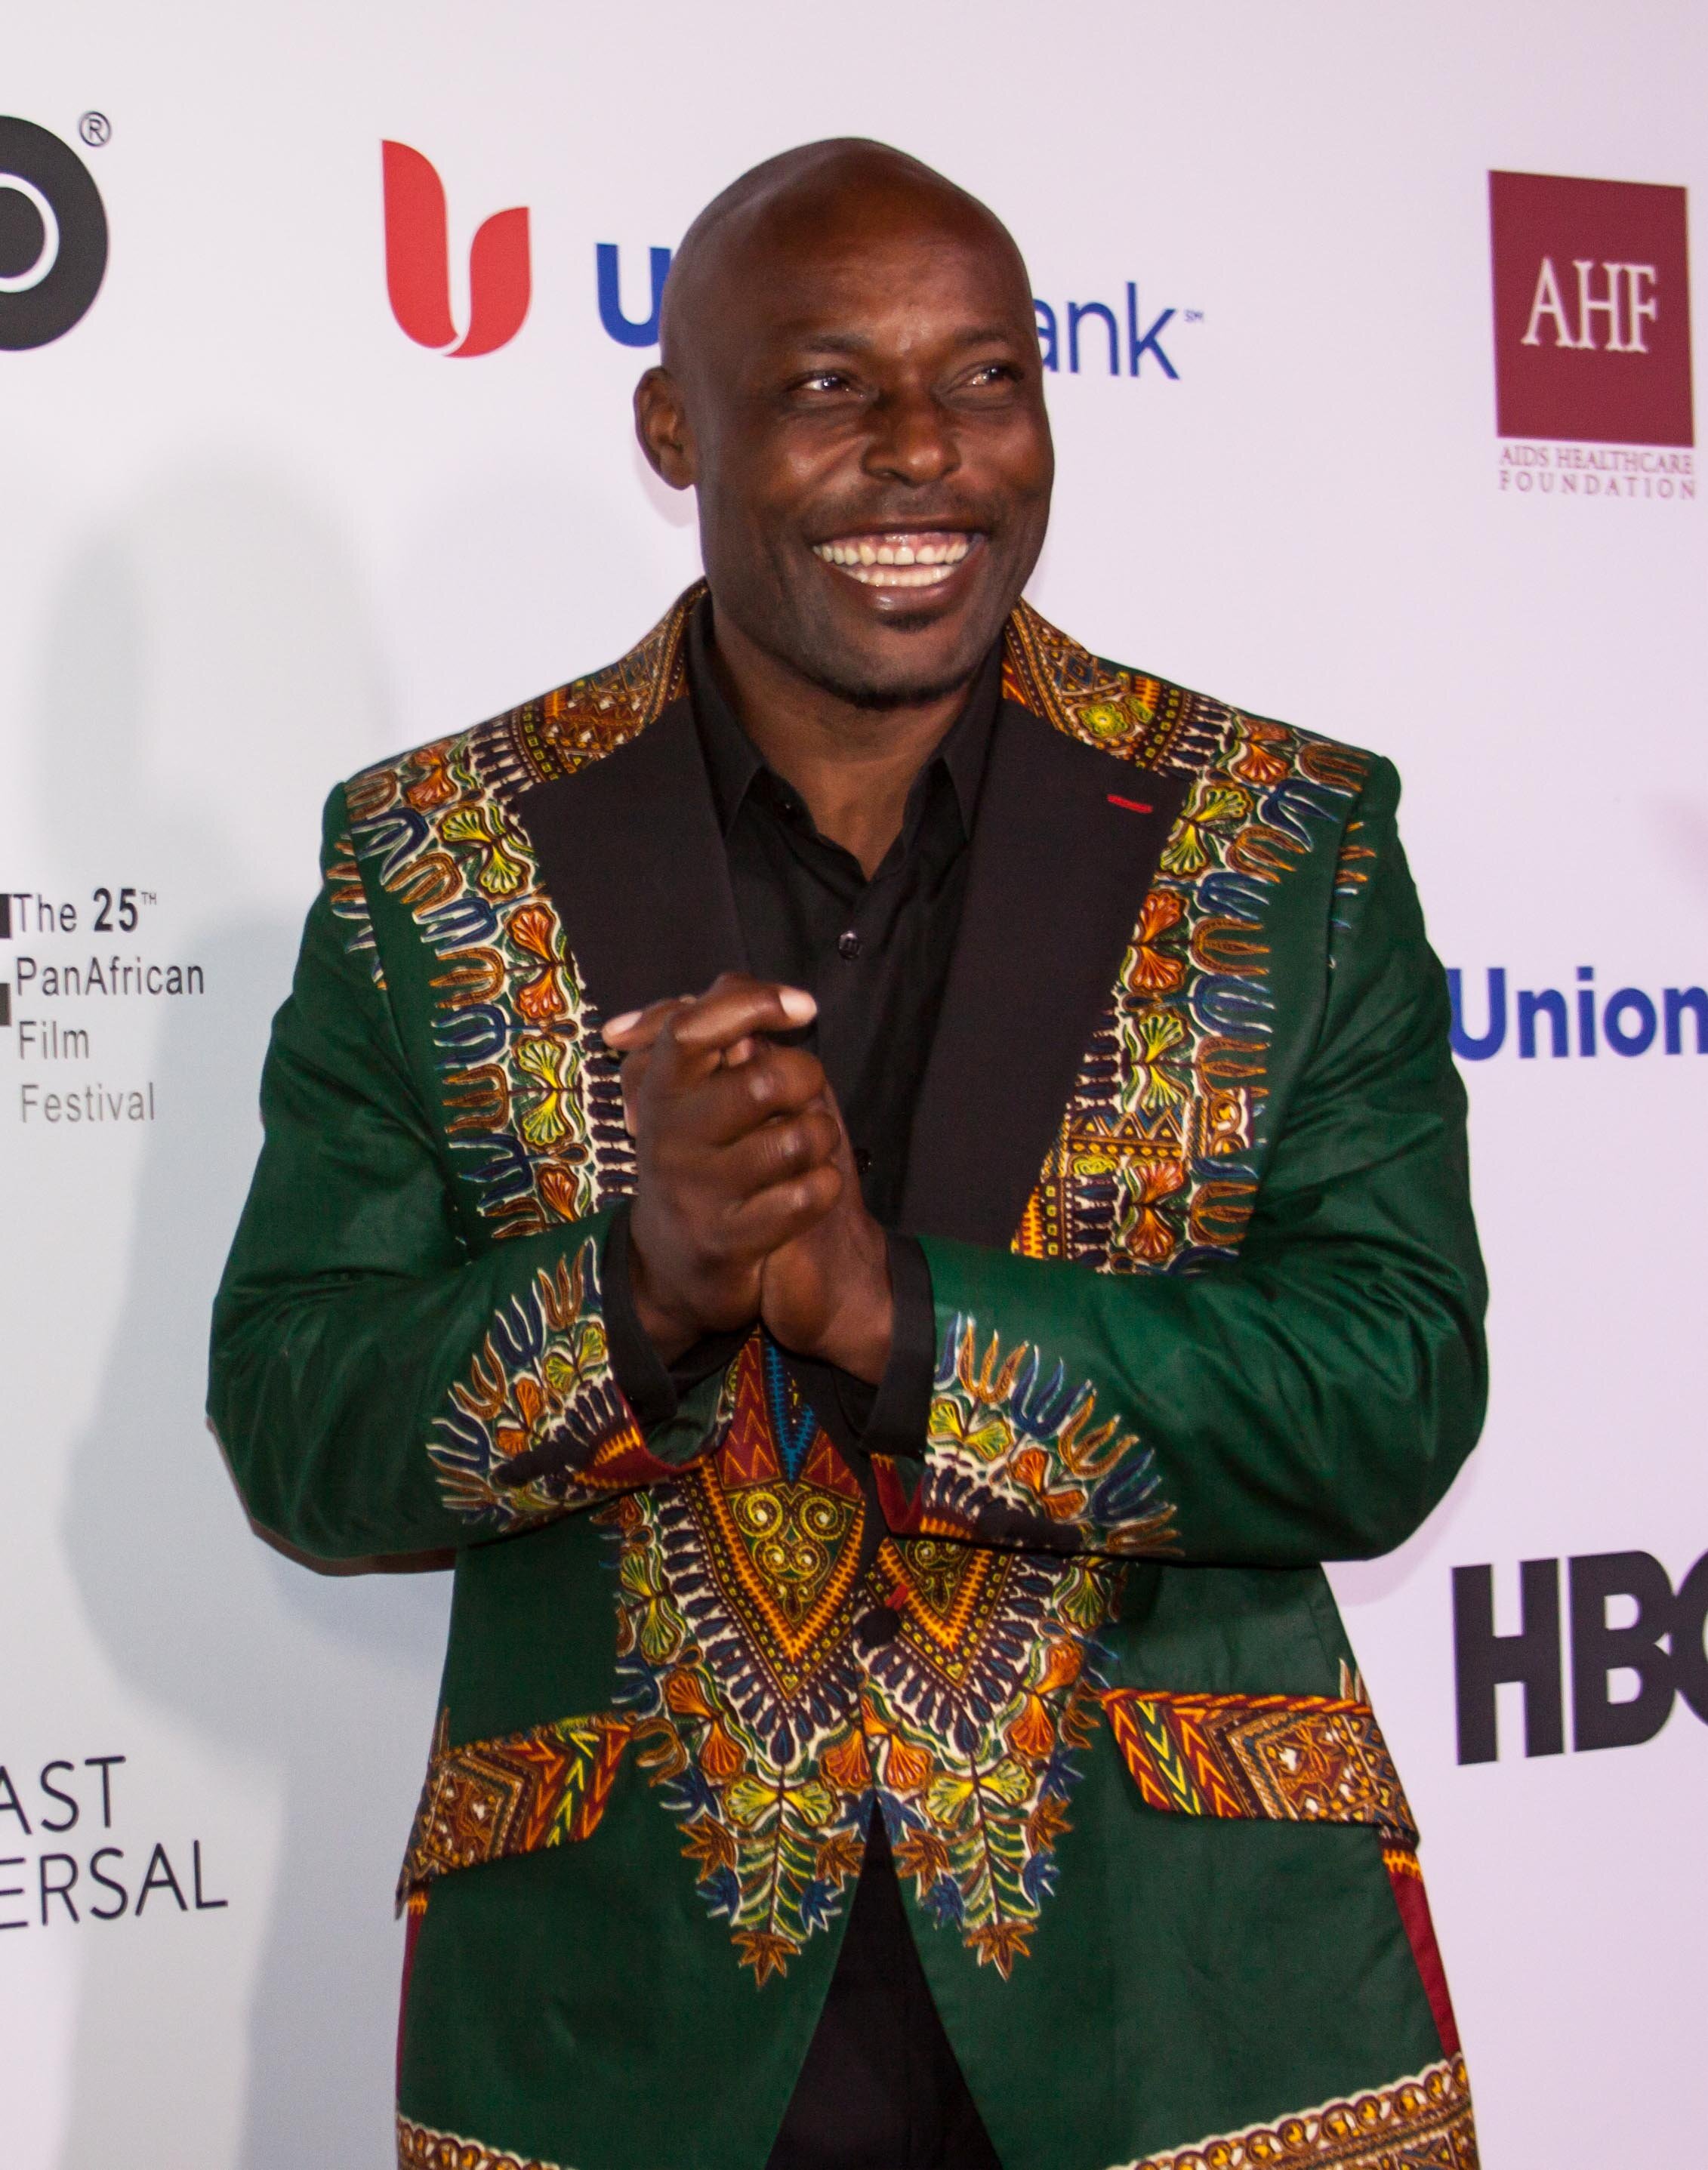  Jimmy Jean-Louis (Haitian) at the Pan African Film Festival in Los Angeles. 